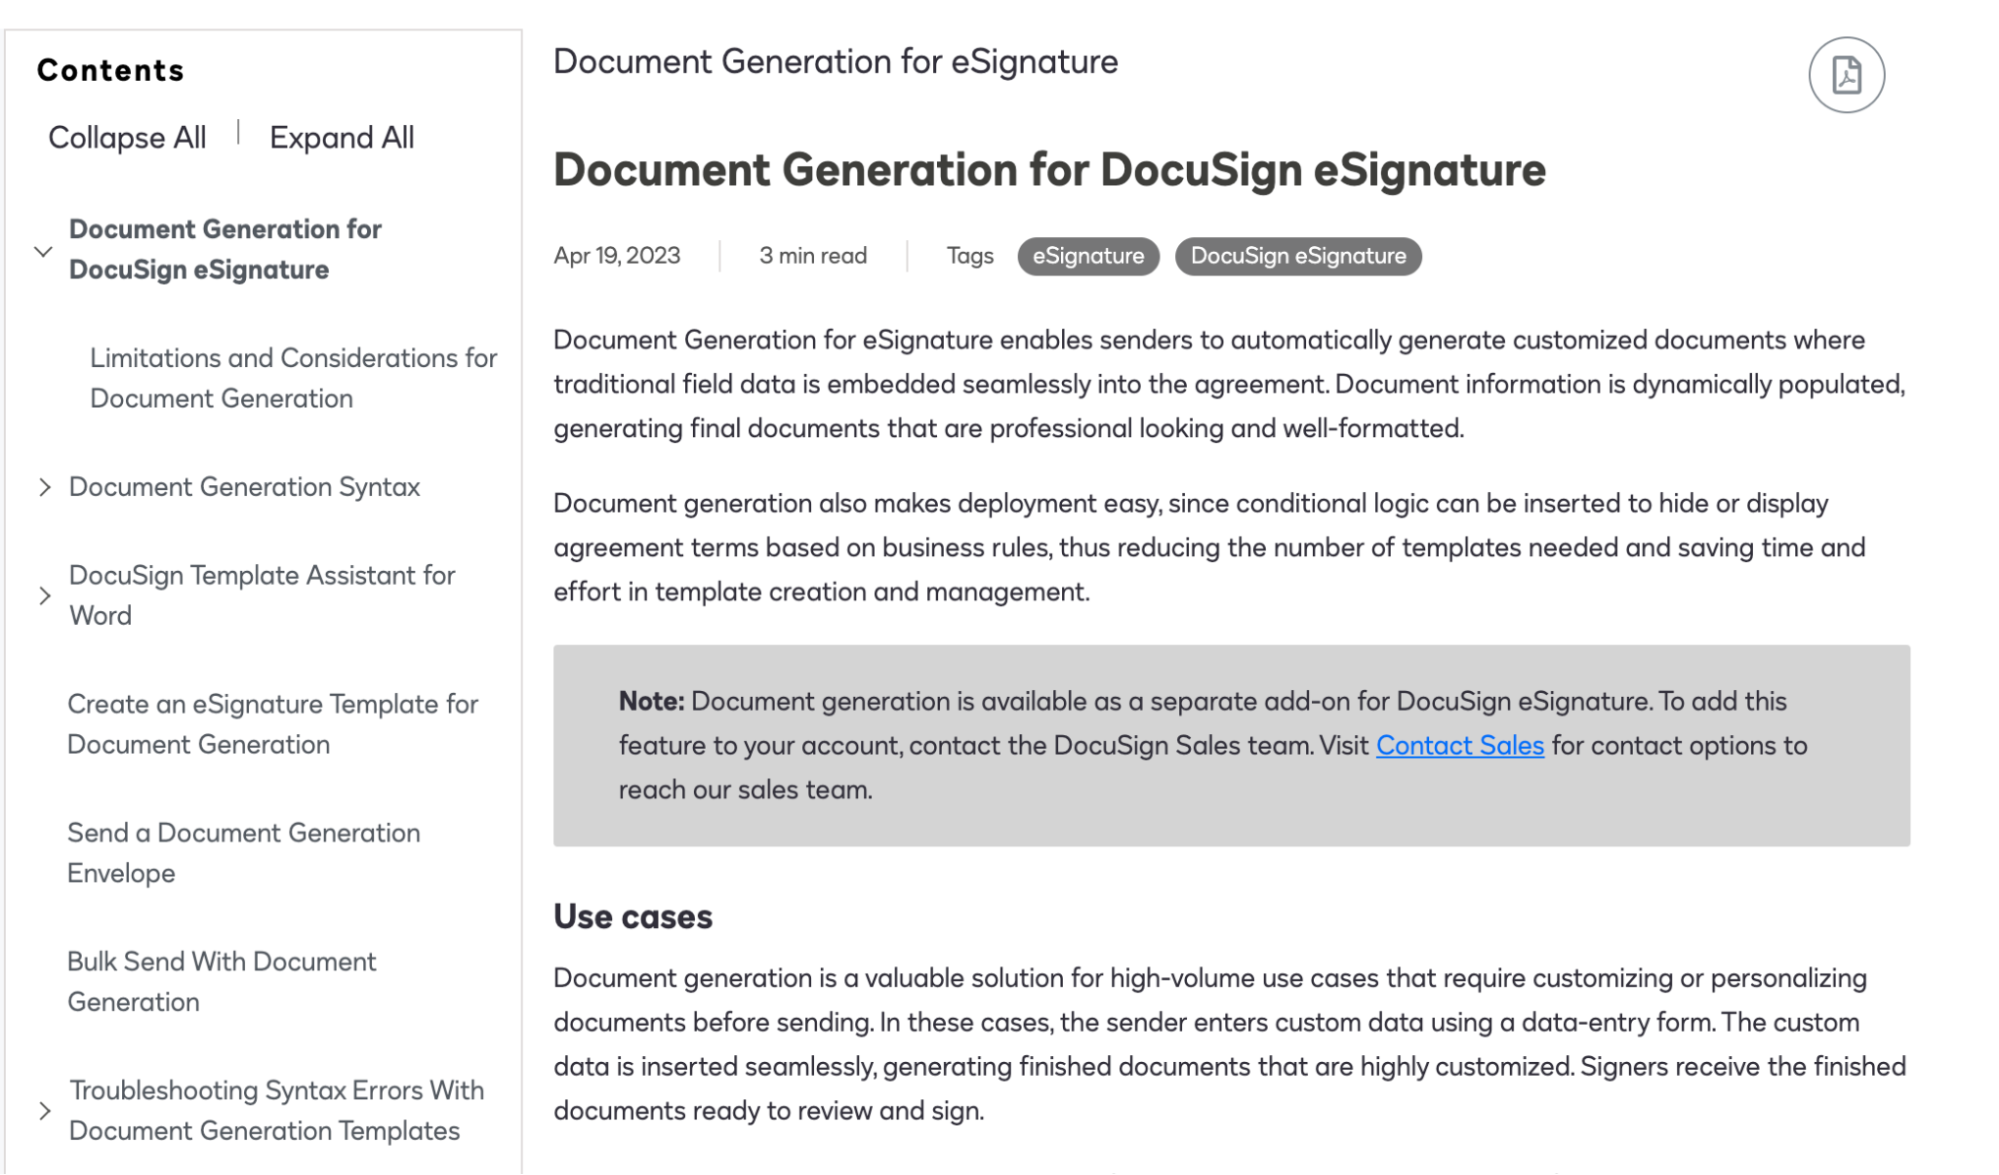 DocuSign uses step-by-step guides to increase the value proposition of an already valuable product.